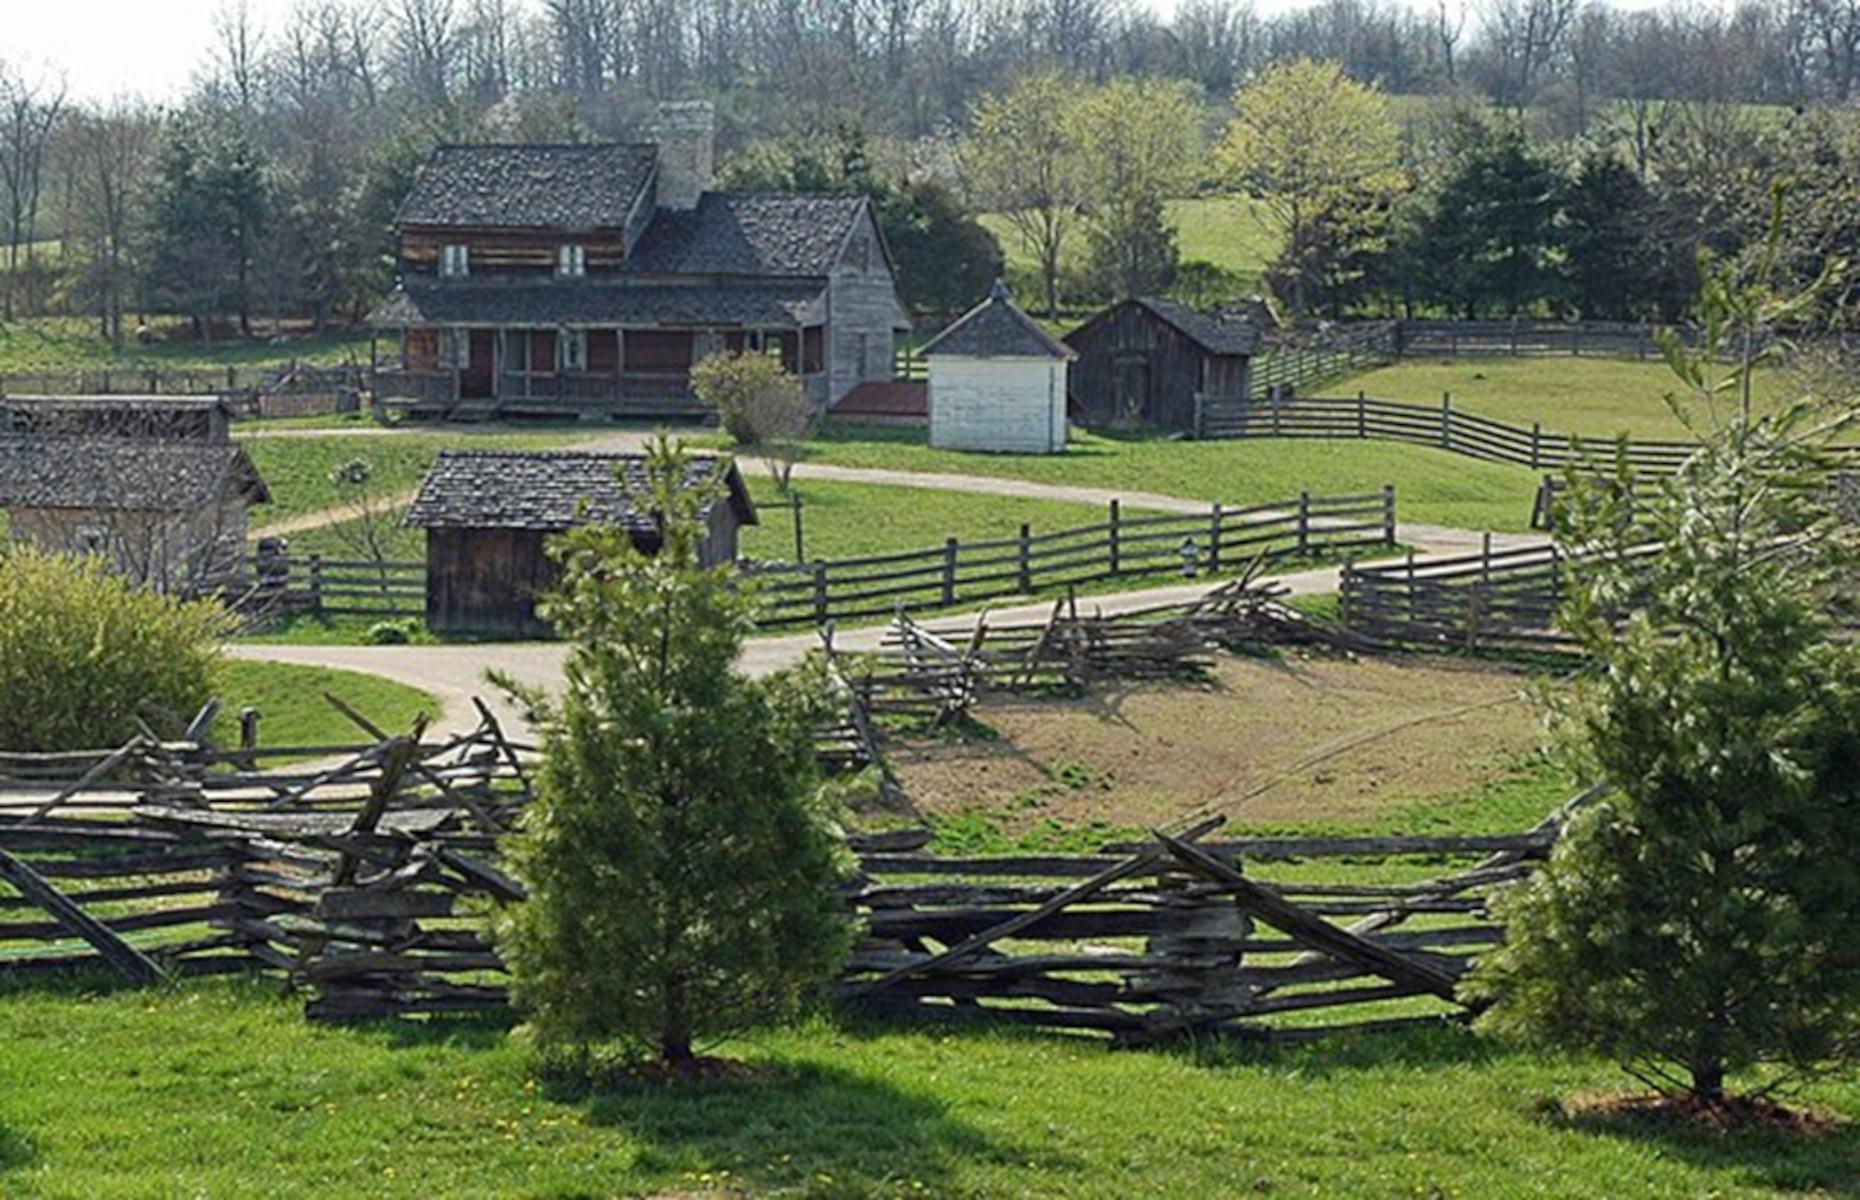 <p><a href="https://www.frontiermuseum.org/">According to its founder</a>, the museum aims to paint a picture of pioneers both ‘before’ and ‘after their arrival in America. The buildings representing the native homes of these pioneers show what life would have looked like before their journey to Virginia, while the ‘American’ section of the museum illustrates what it came to look like after they had settled. This latter section of the museum features a 1700s American settlement, an 1820s American farm, an 1850s American farm, an early <a href="https://www.loveproperty.com/gallerylist/93050/abandoned-schools-for-sale-that-would-make-amazing-homes">American schoolhouse</a>, and a 1700s Native American farm.</p>